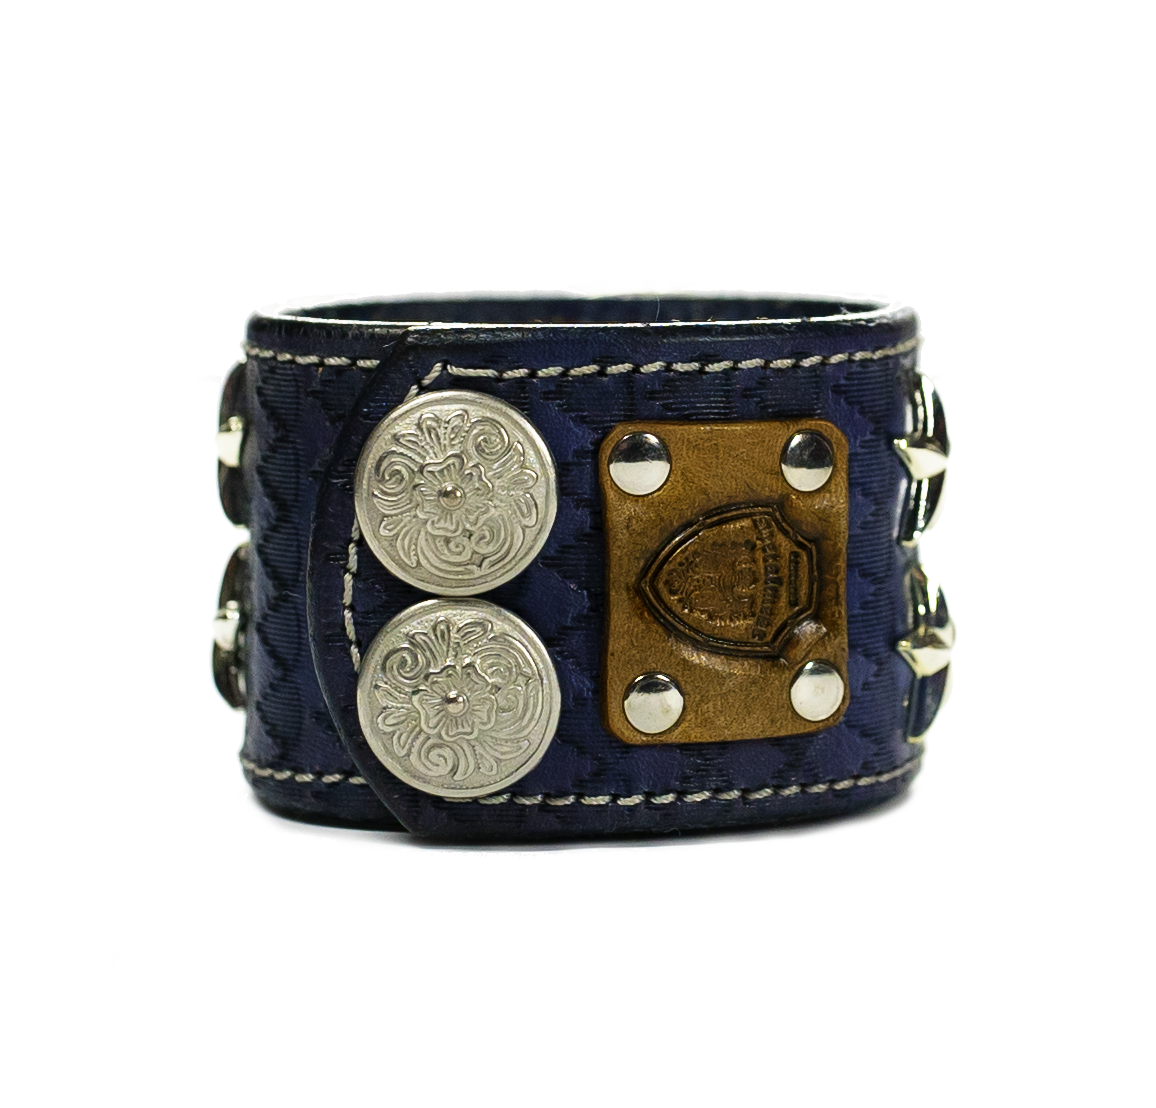 The Big Skull Navy Leather Cuff back side